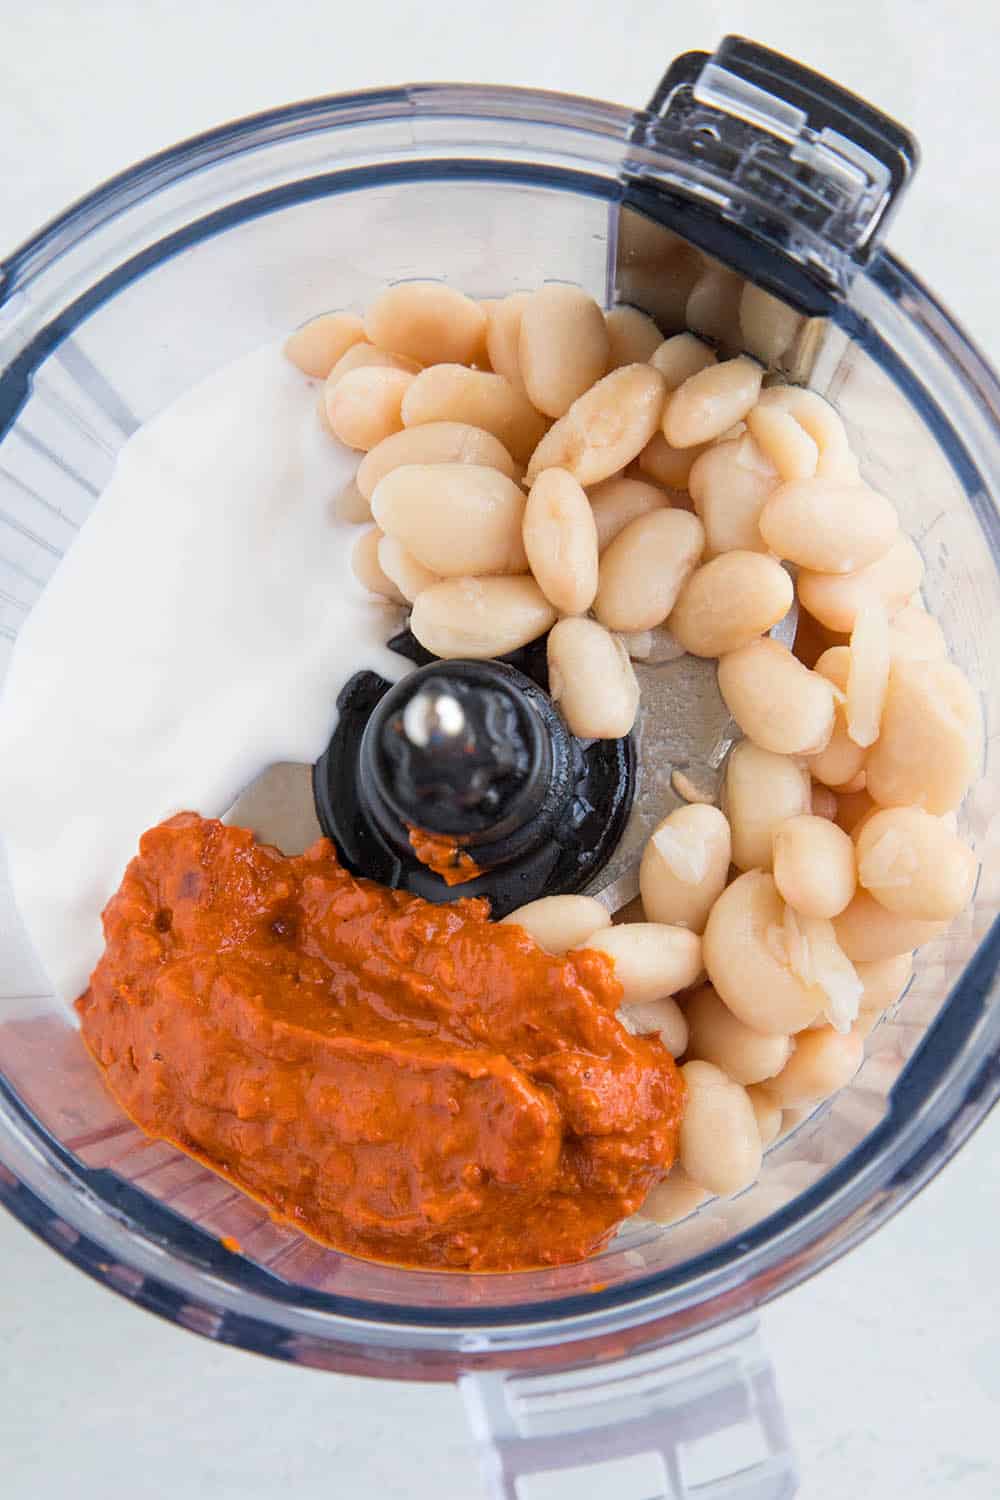 Ingredients for my Creamy White Bean Dip with Harissa in the food processor